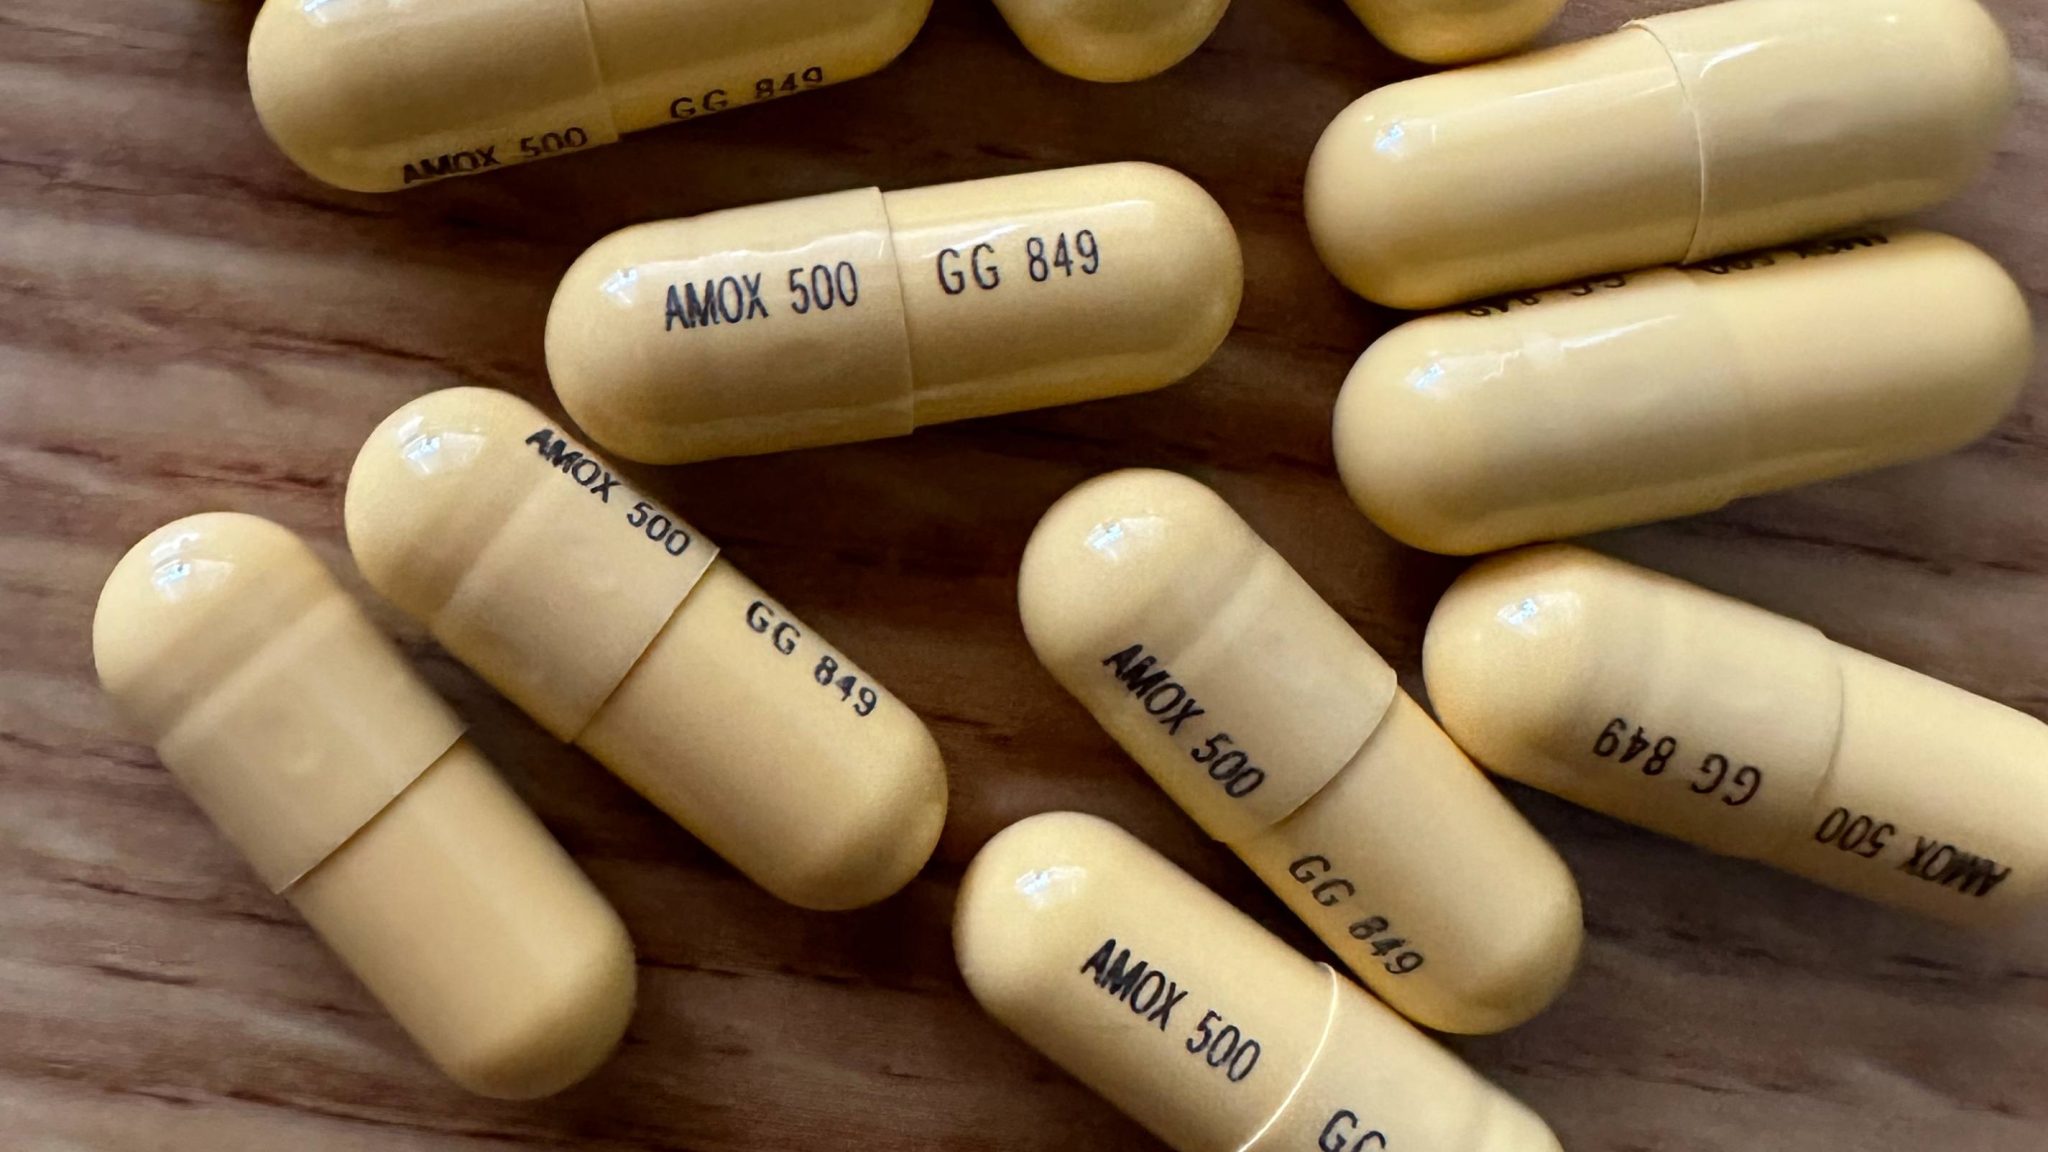 Antibiotic shortage what to know if you can't find amoxicillin Mayo